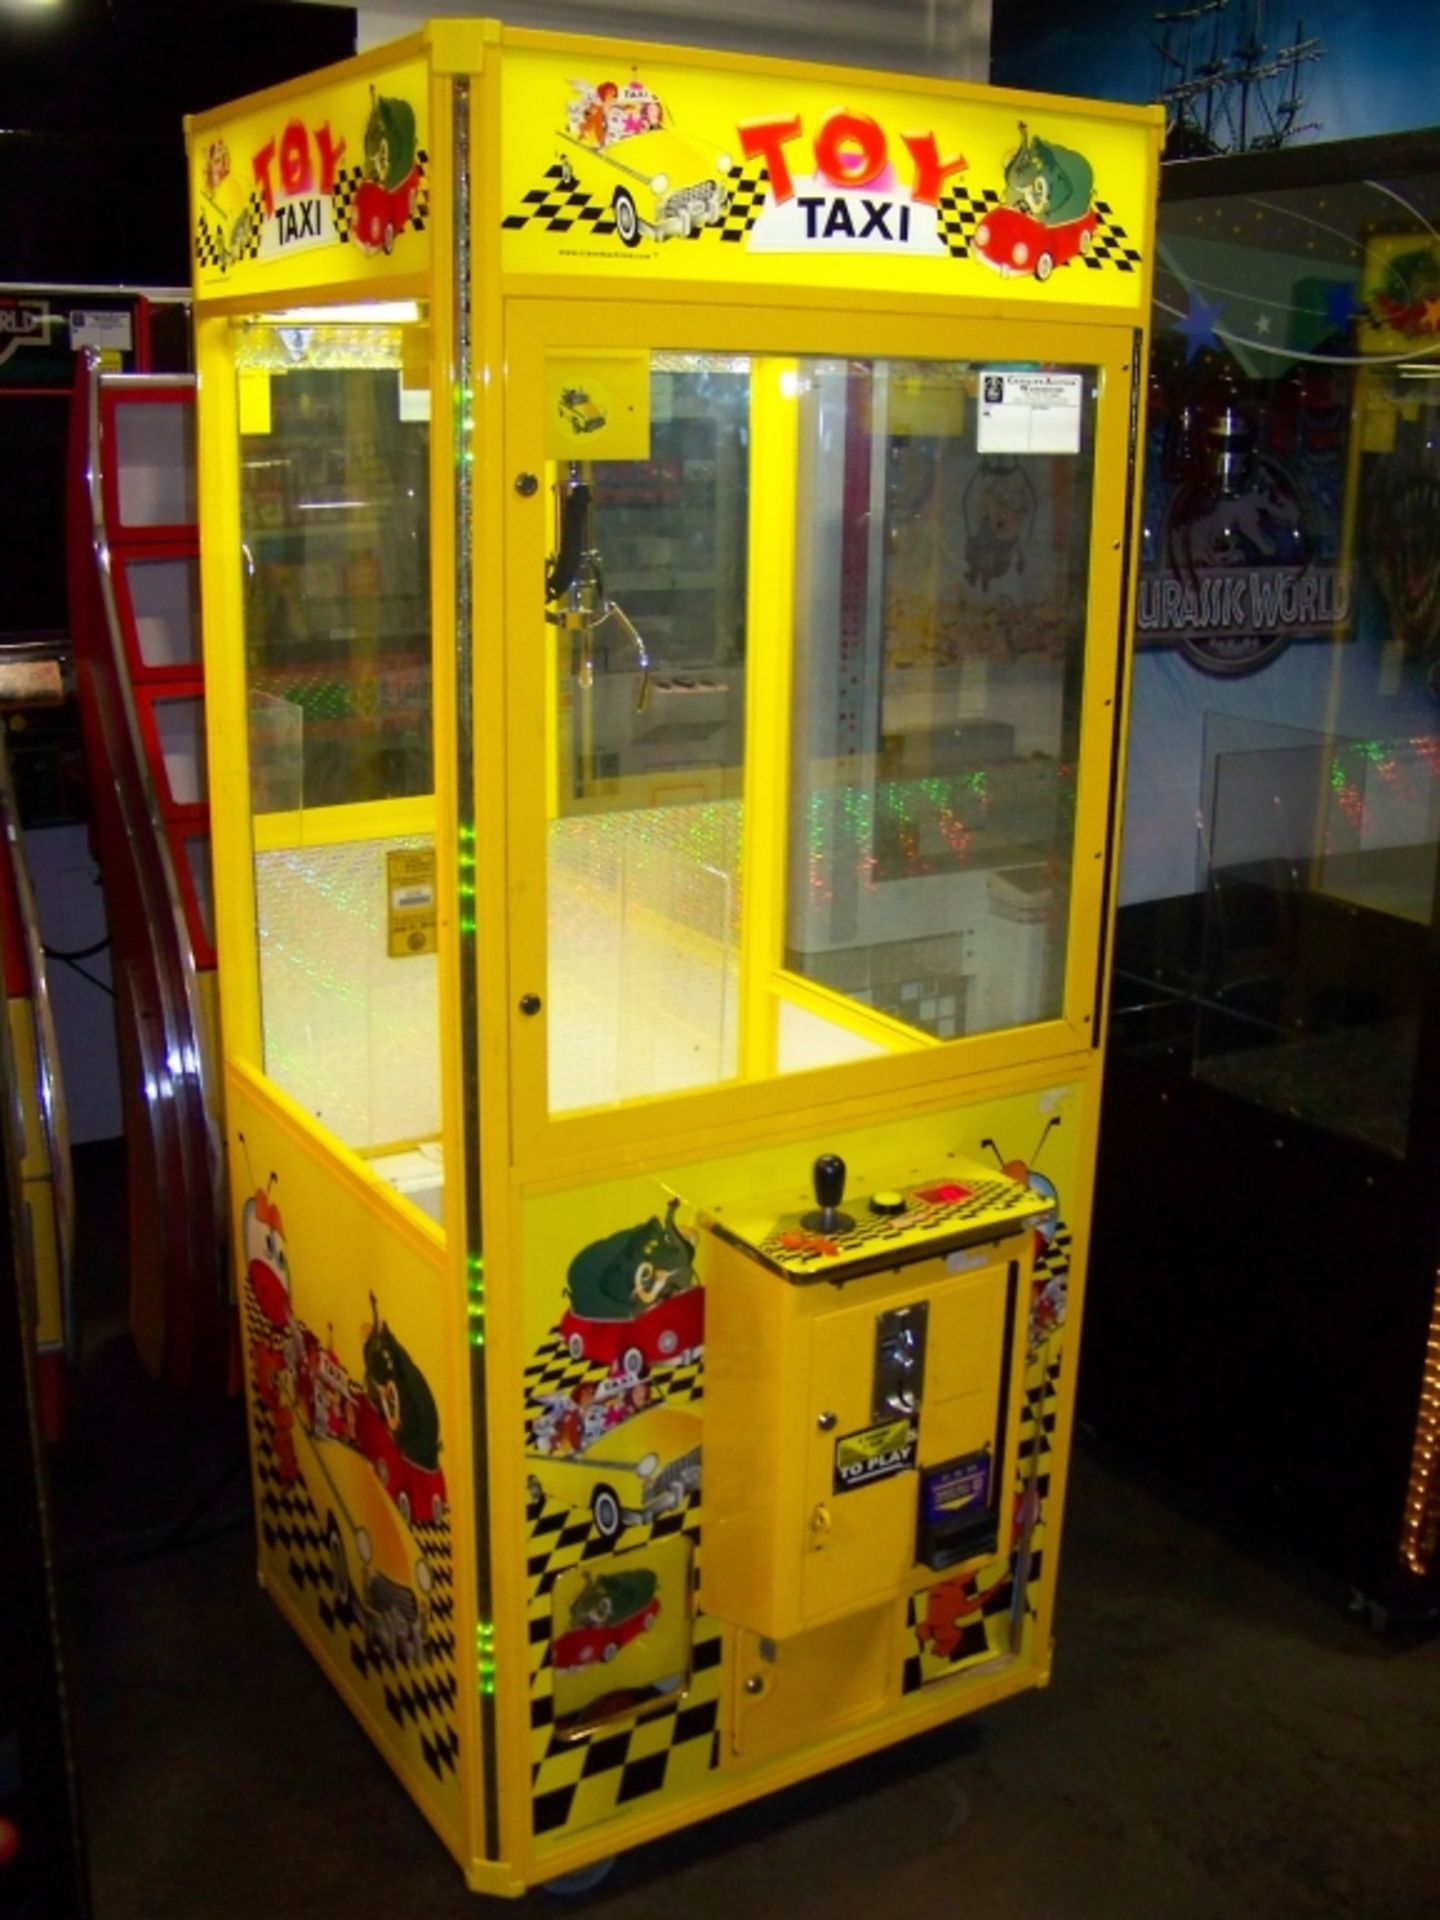 30"" TOY TAXI PLUSH CLAW CRANE MACHINE Item is in used condition. Evidence of wear and commercial